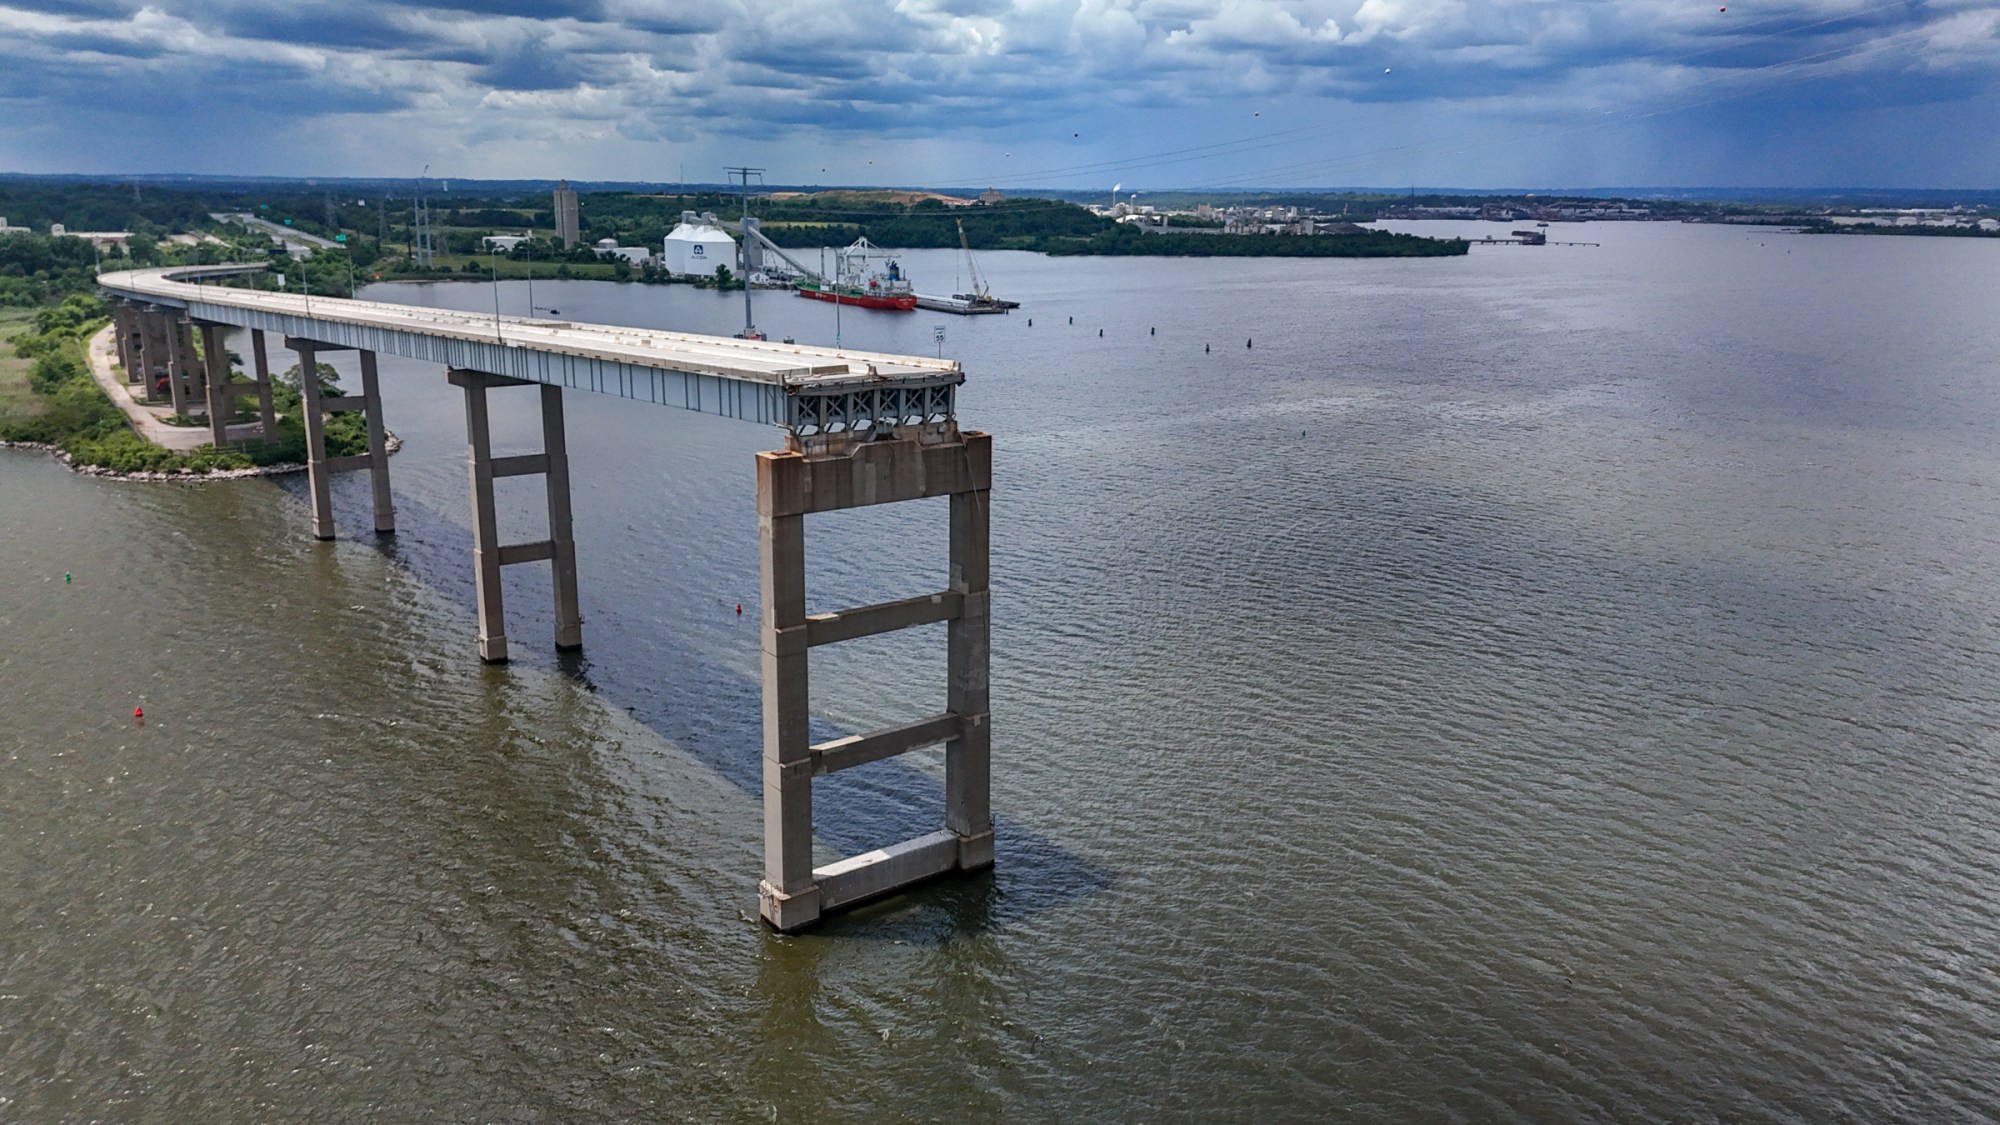 The ramp to the Francis Scott Key Bridge is seen on the southwest side of the Patapsco River two months after the catastrophic bridge collapse.